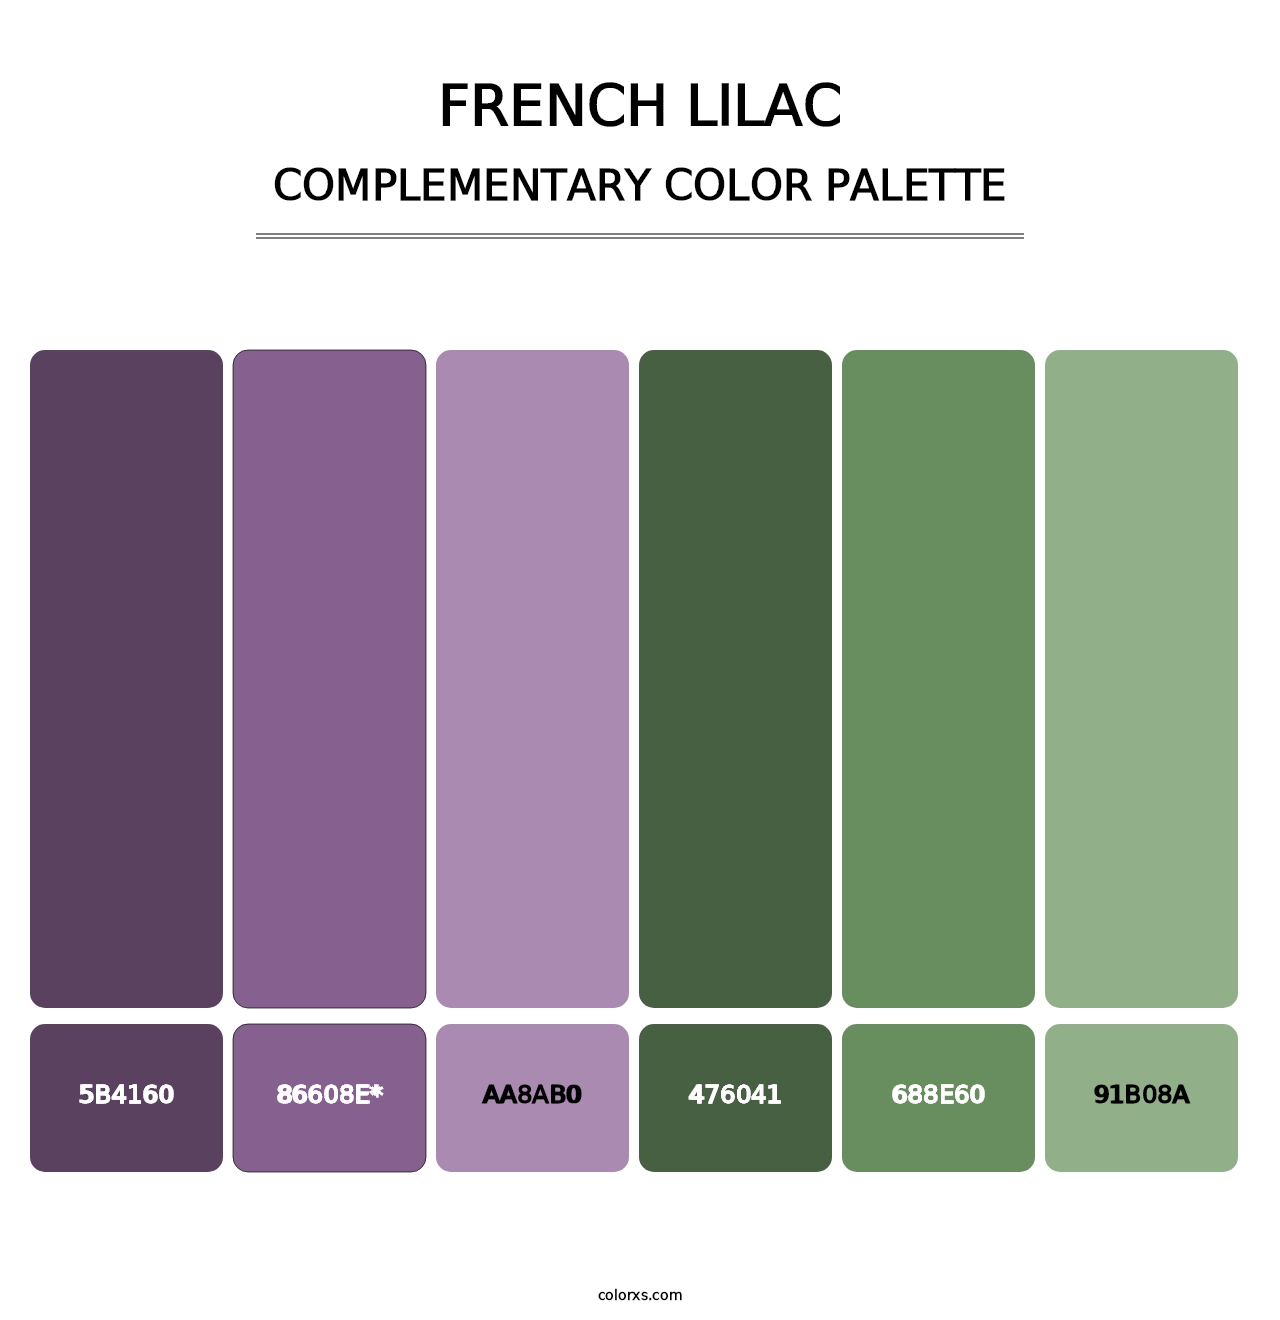 French Lilac - Complementary Color Palette